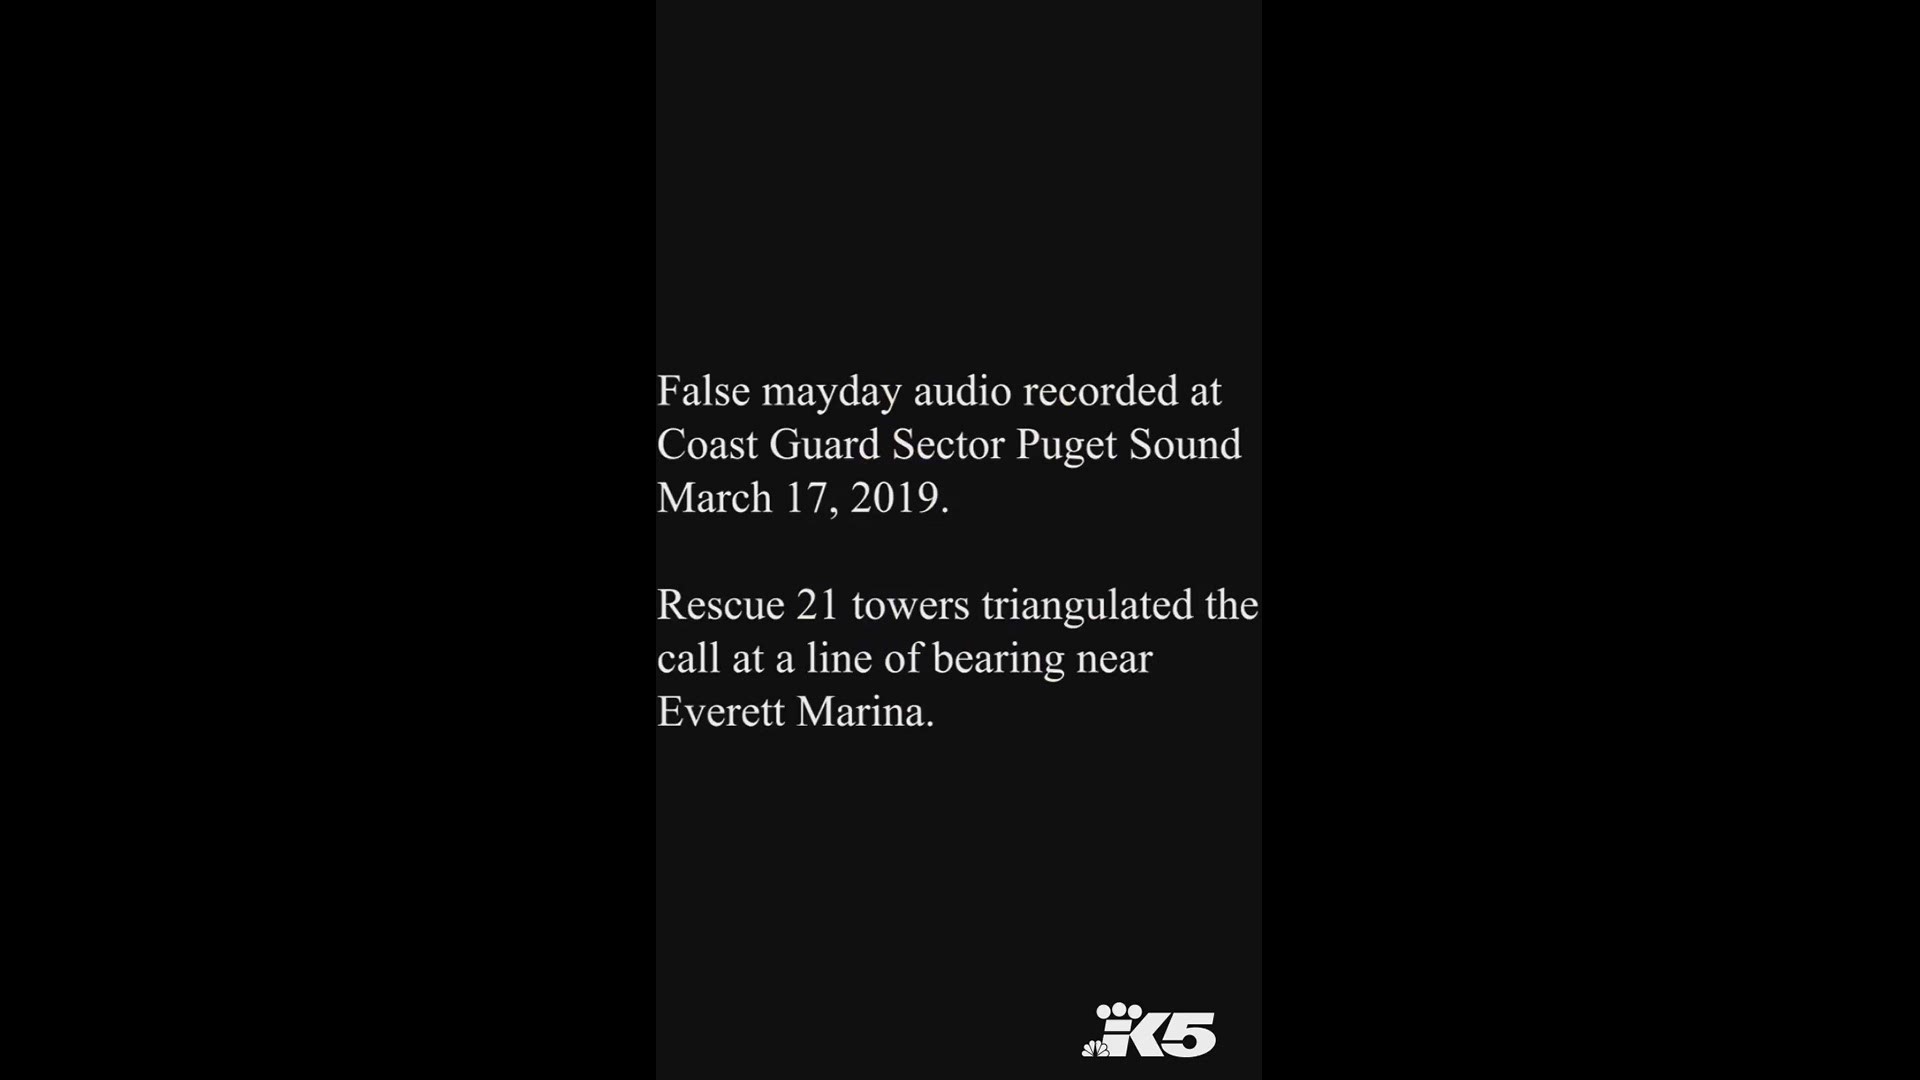 Coast Guard Sector Puget Sound received two call Sunday that are believed to be false mayday reports, one originating from Whidbey Island and the other from Everett Marina.